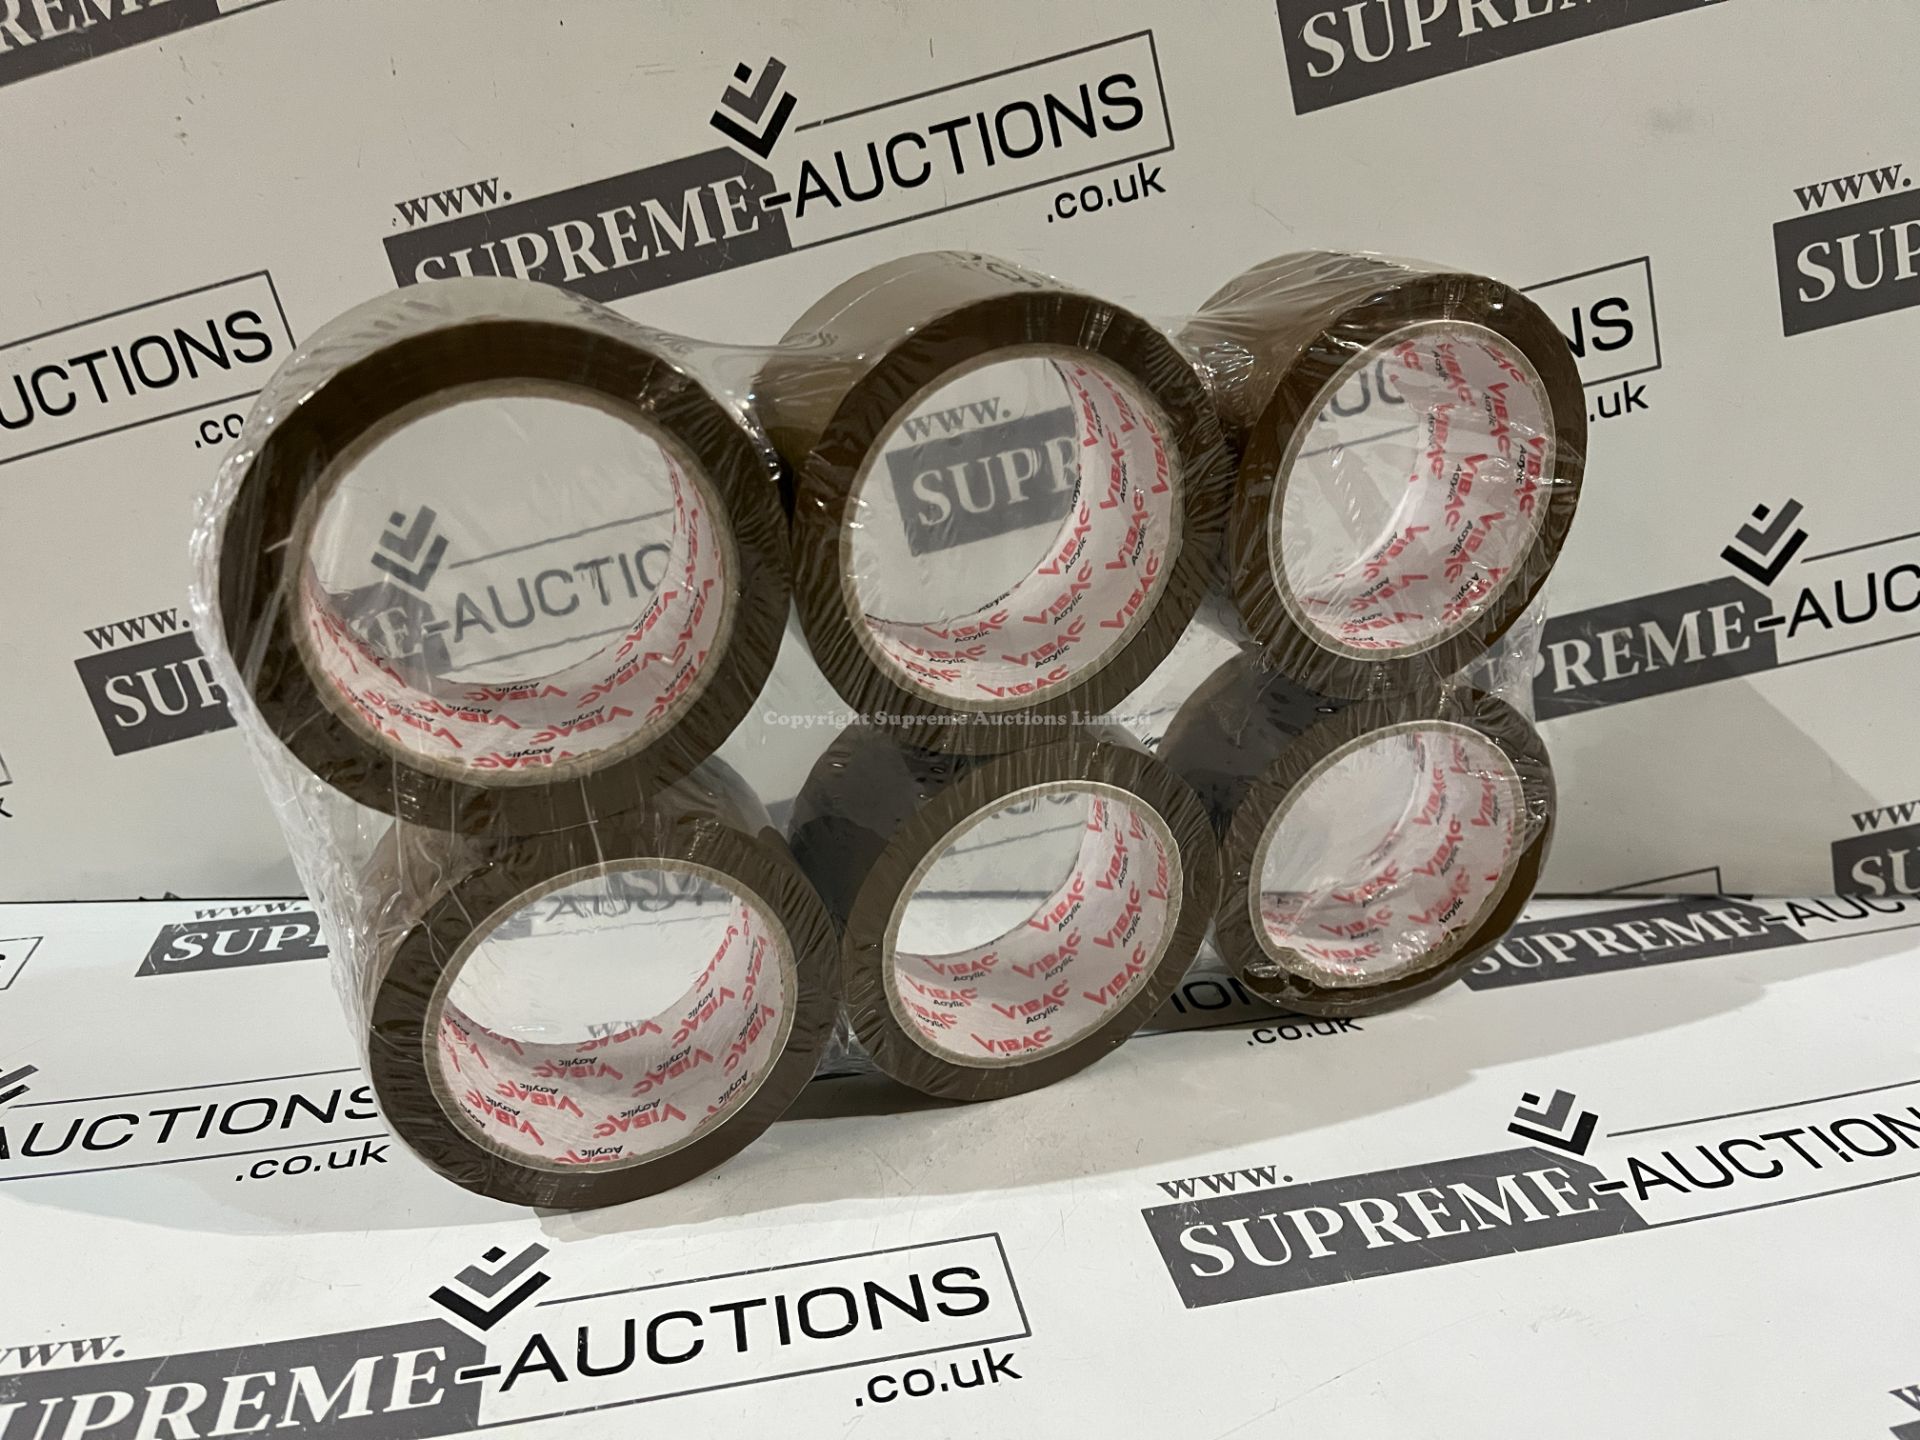 180 X BRAND NEW ROLLS OF BROWN TAPE IN 5 BOXES R18-8